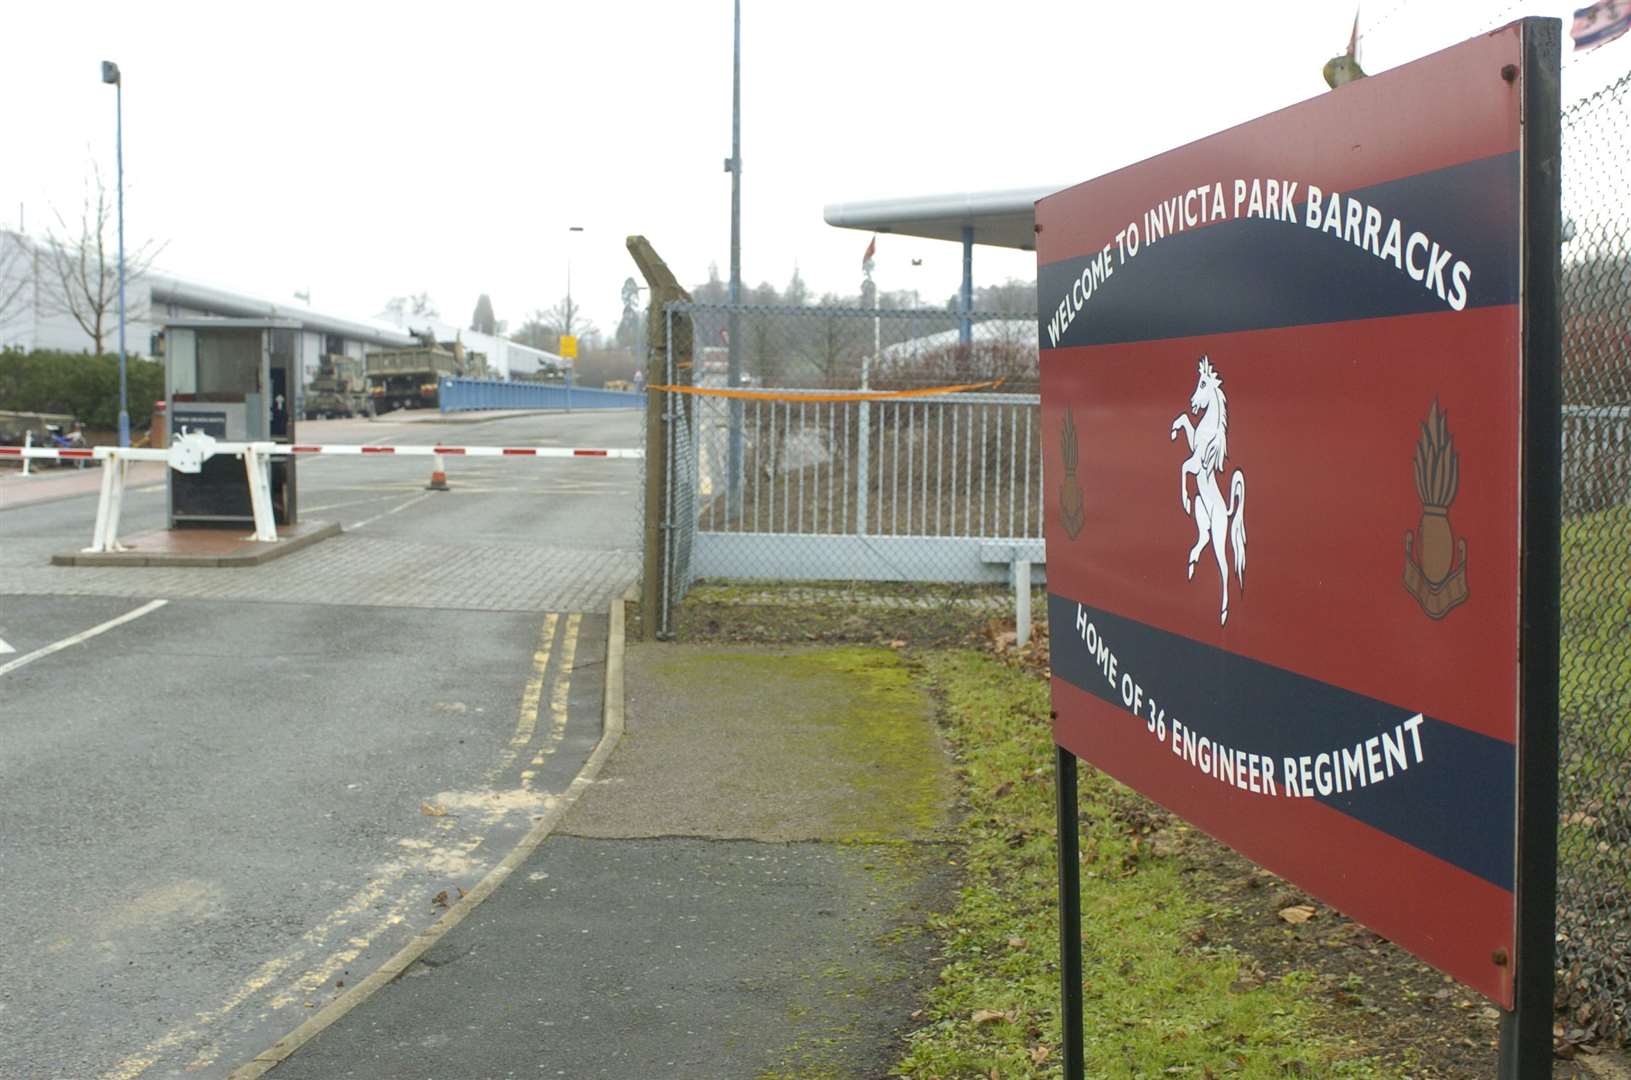 The Invicta Barracks site earmarked for 1,300 homes falls within the low value zone